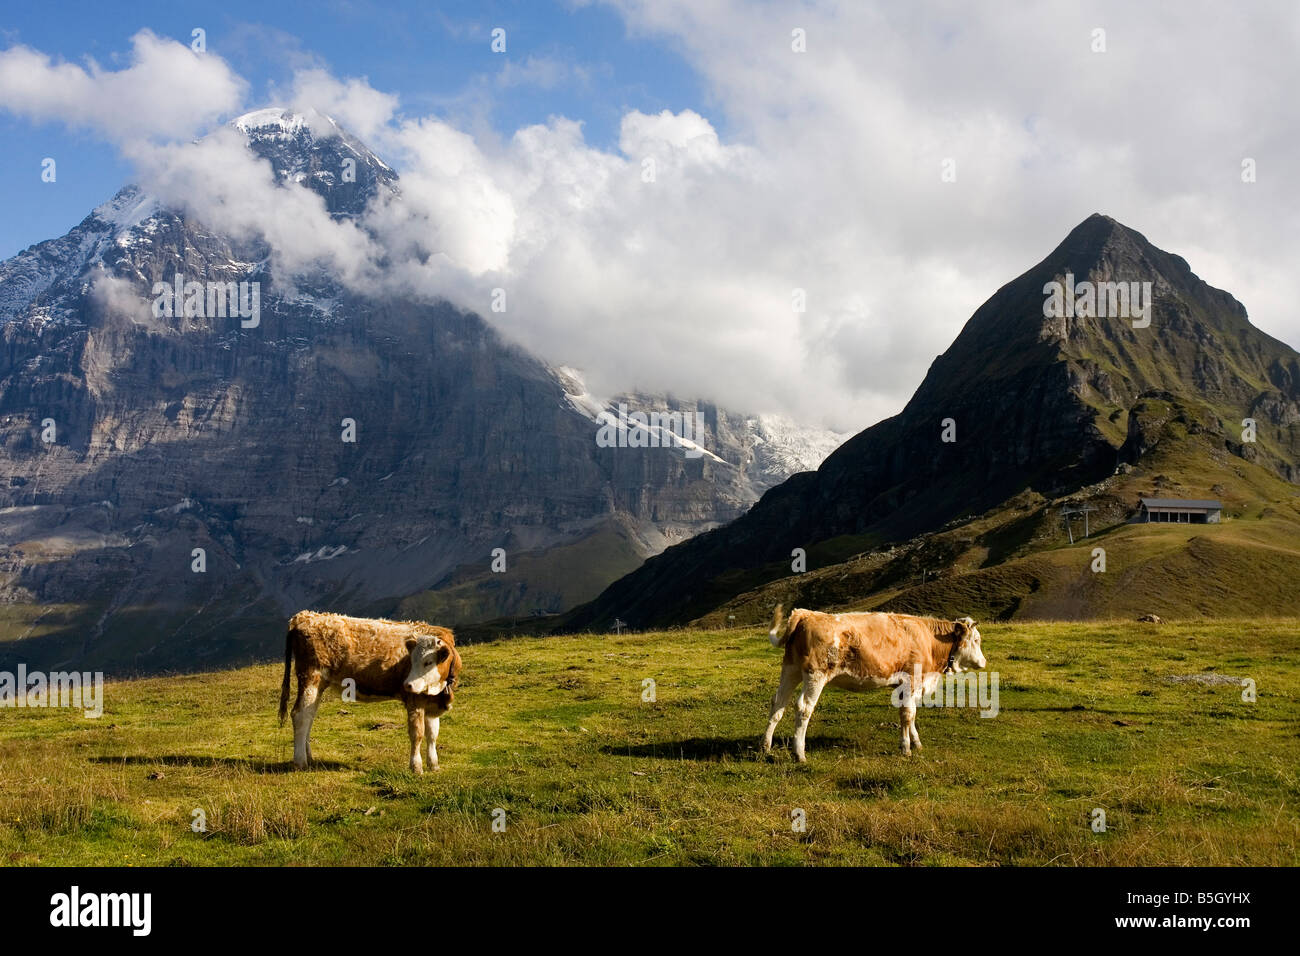 Alpine cows with the Eiger mountain in the background Switzerland Stock Photo